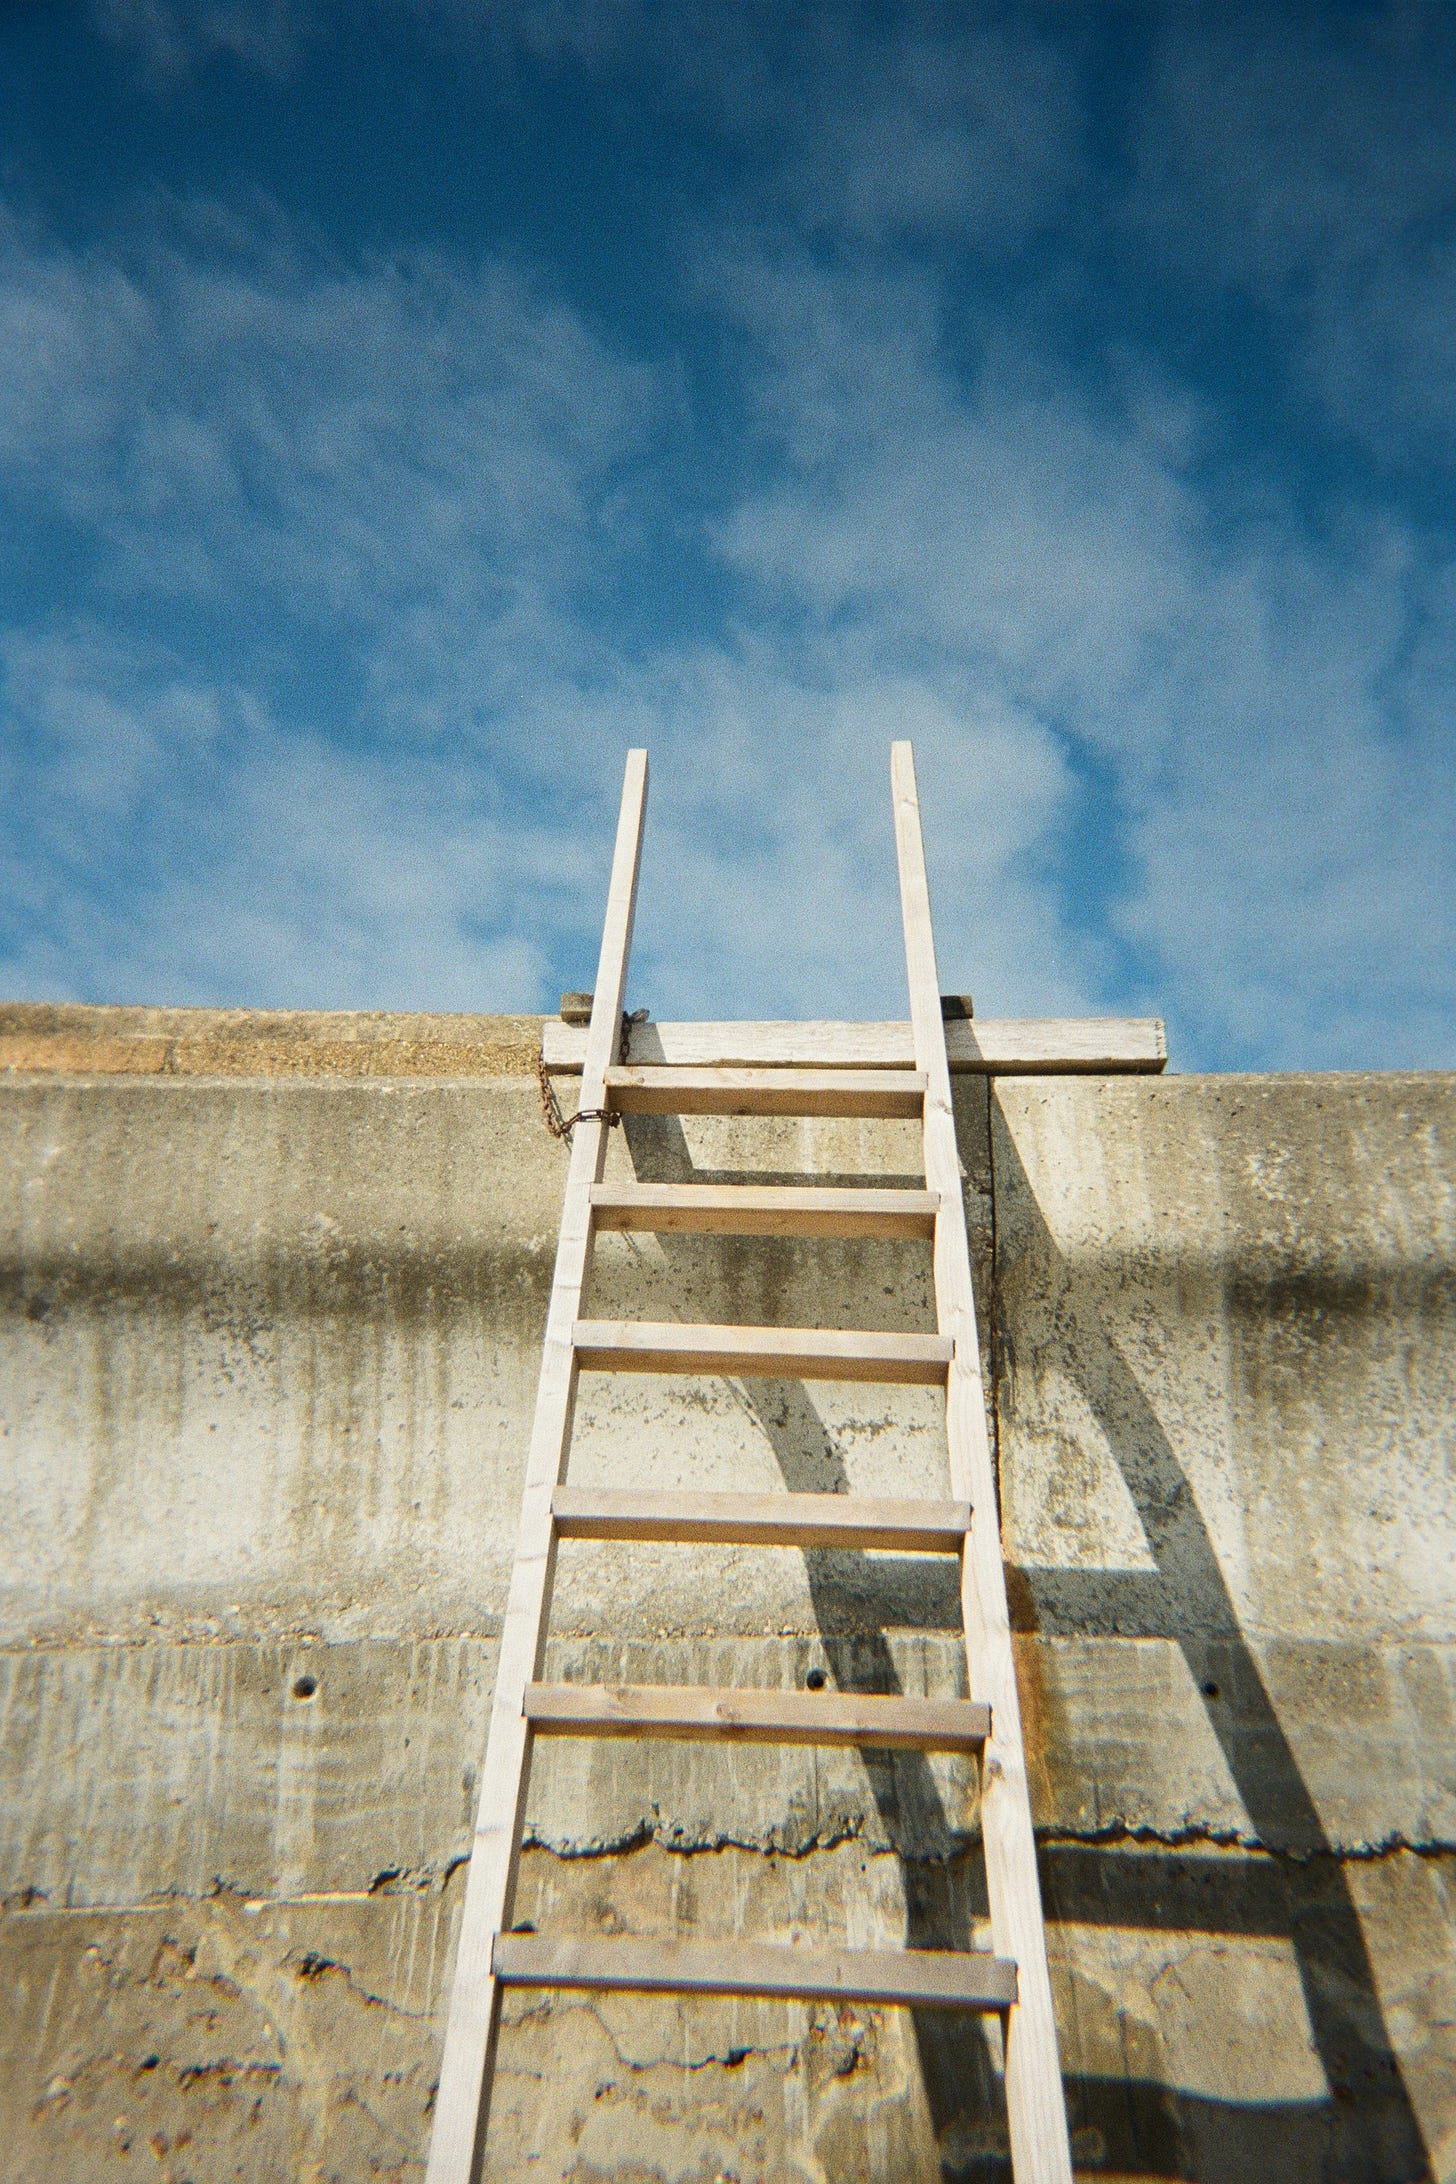 photo of a ladder in place to climb a wall and reach the blue sky beyond